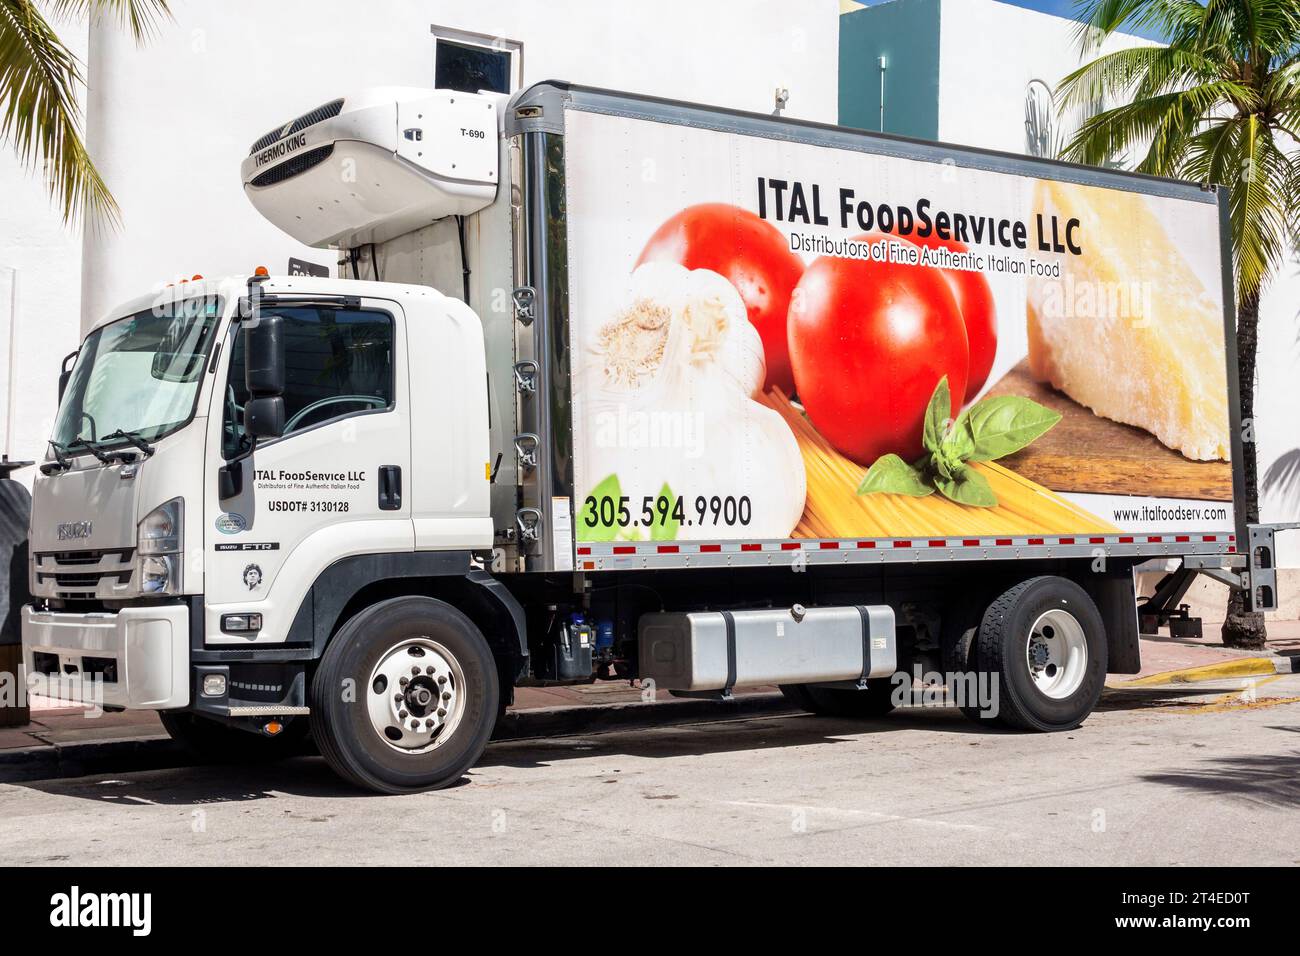 Miami Beach Florida,outside exterior,truck lorry food delivery service distributor,advertising livery,business Stock Photo